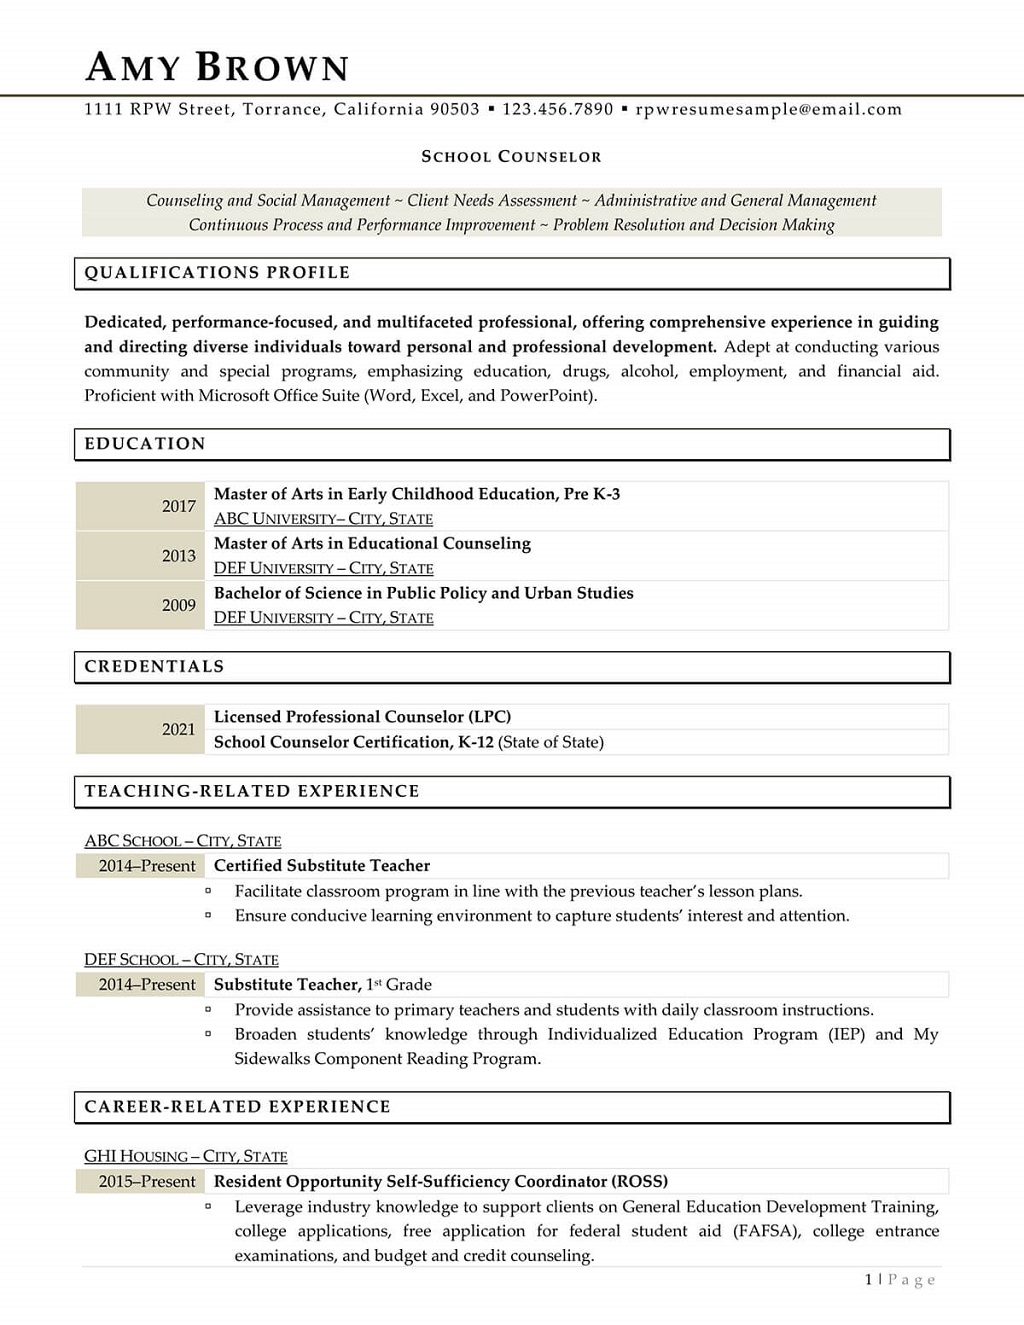 School Counselor Resume Page 1